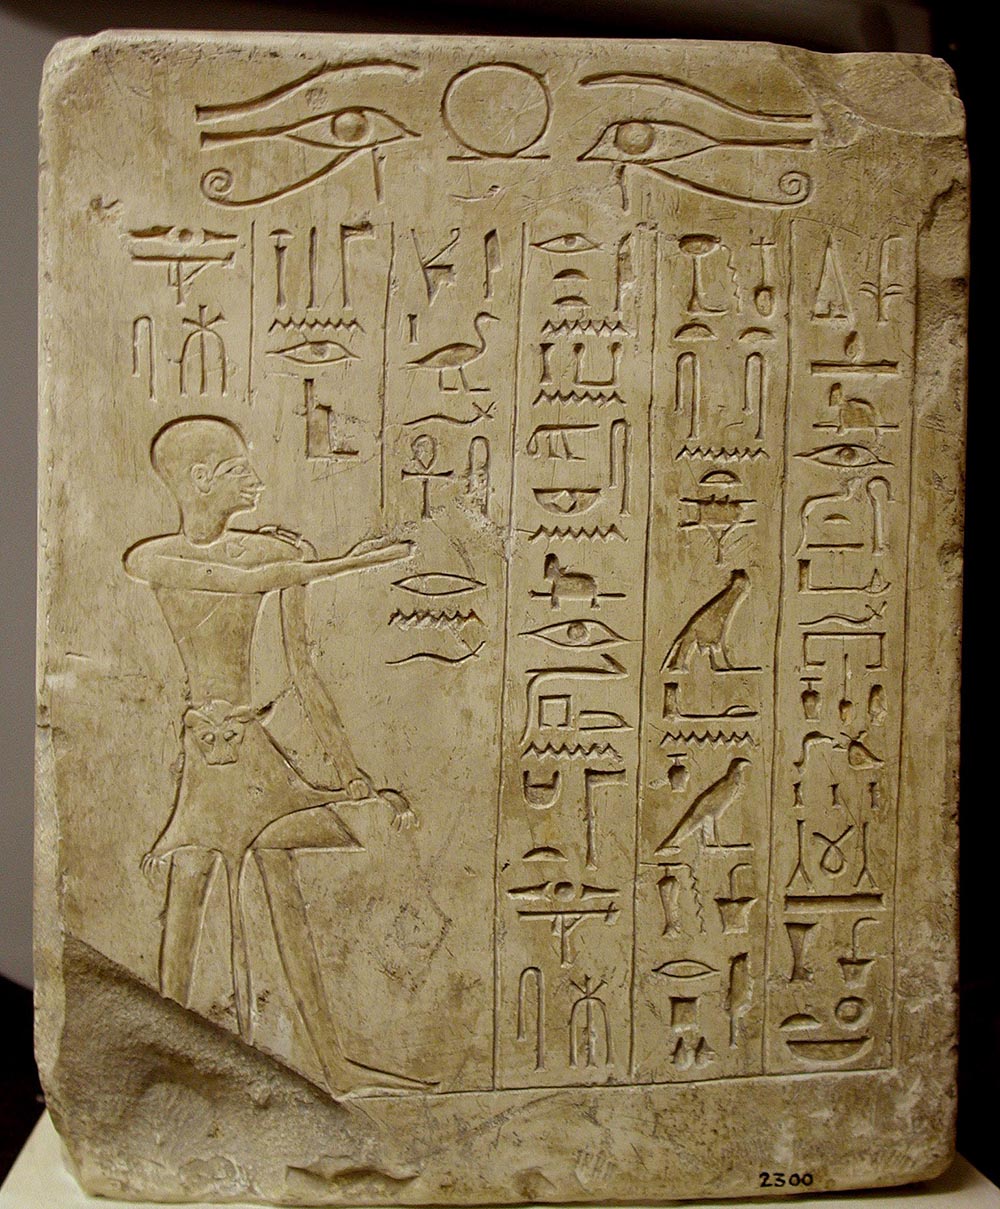 Statue with inscription: An offering that the king gives to Osiris, ruler of eternity, so that he may give a voice offering of bread and beer, meat and poultry, alabaster and linen, incense and oil, and all things good and pure, to breathe in the fragrance of myrrh and frankincense, fresh water, wine, and milk, for the ka of the overseer of the festivals of Osiris, steward of the God’s Wife, Minmose. Made by his son so that his name may live, the first priest of Osiris, Minmose, Egypt, c. 1200 BC.